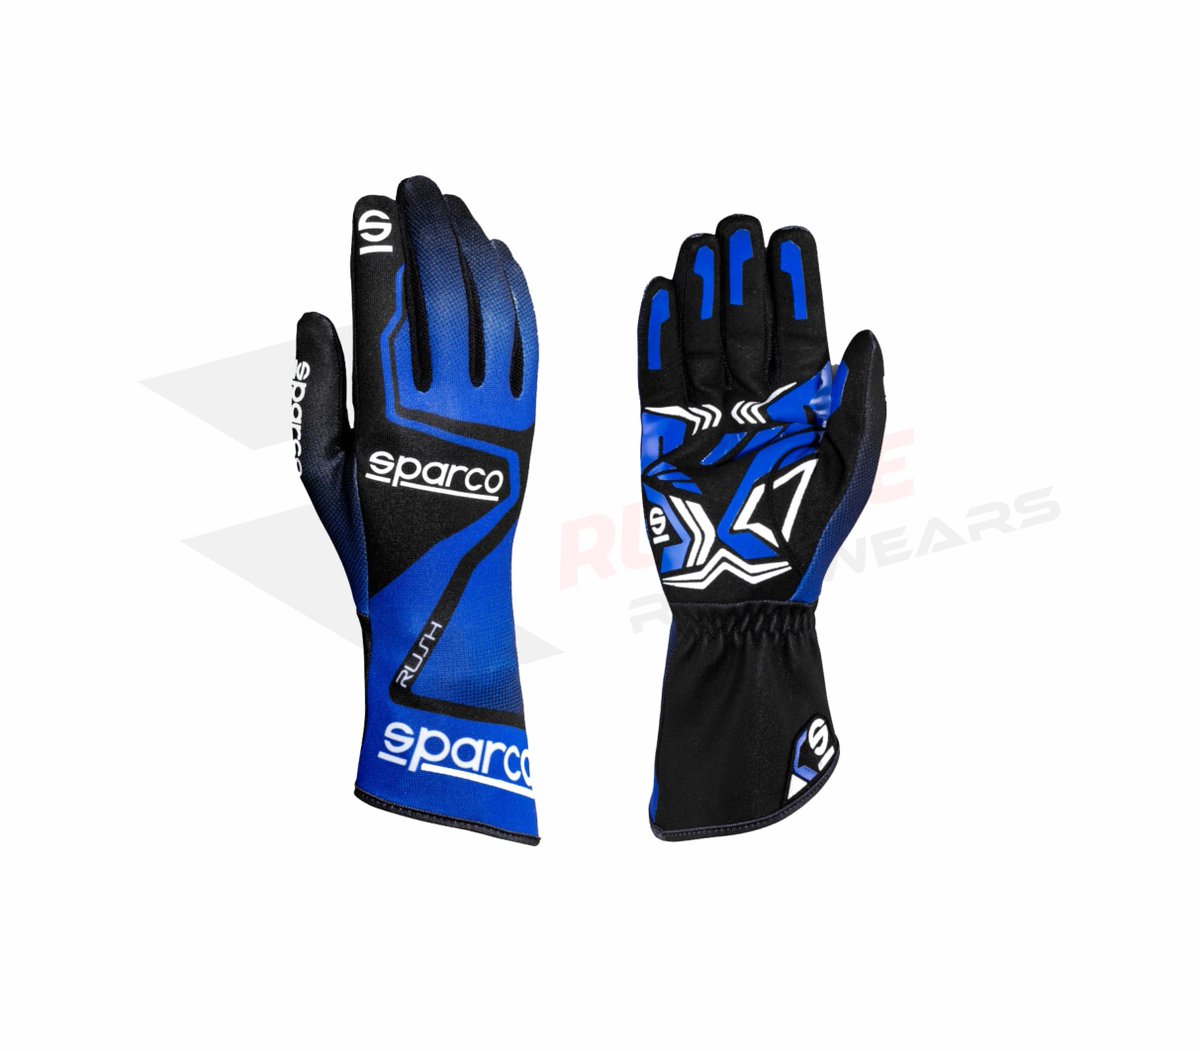 'Sparco' Kart Racing Gloves
FIA Approved
According to your requirements this with your logos
Email : rustleracewears@gmail.com
#Sparco #SparcoBrasil #IamSparco #SparcoKarting #LuvaSparco #LuvaRush #SparcoRush #SparcoGloves #Kart #Karting #sparcogaming #kartracing #sparcodealer